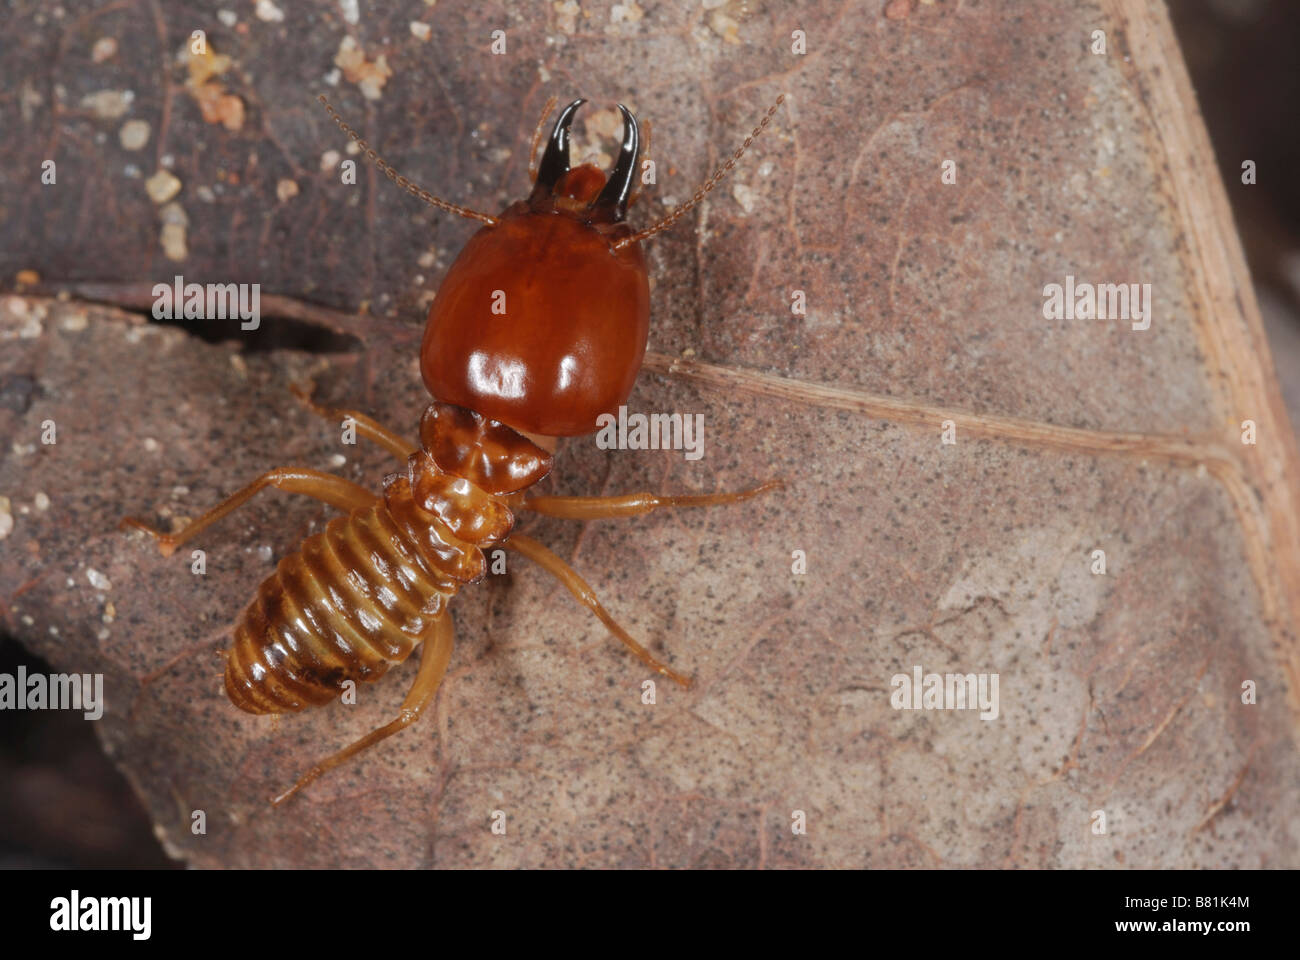 A soldier termite. They have much larger heads and mandibles to help them to bite and face any threat. Stock Photo